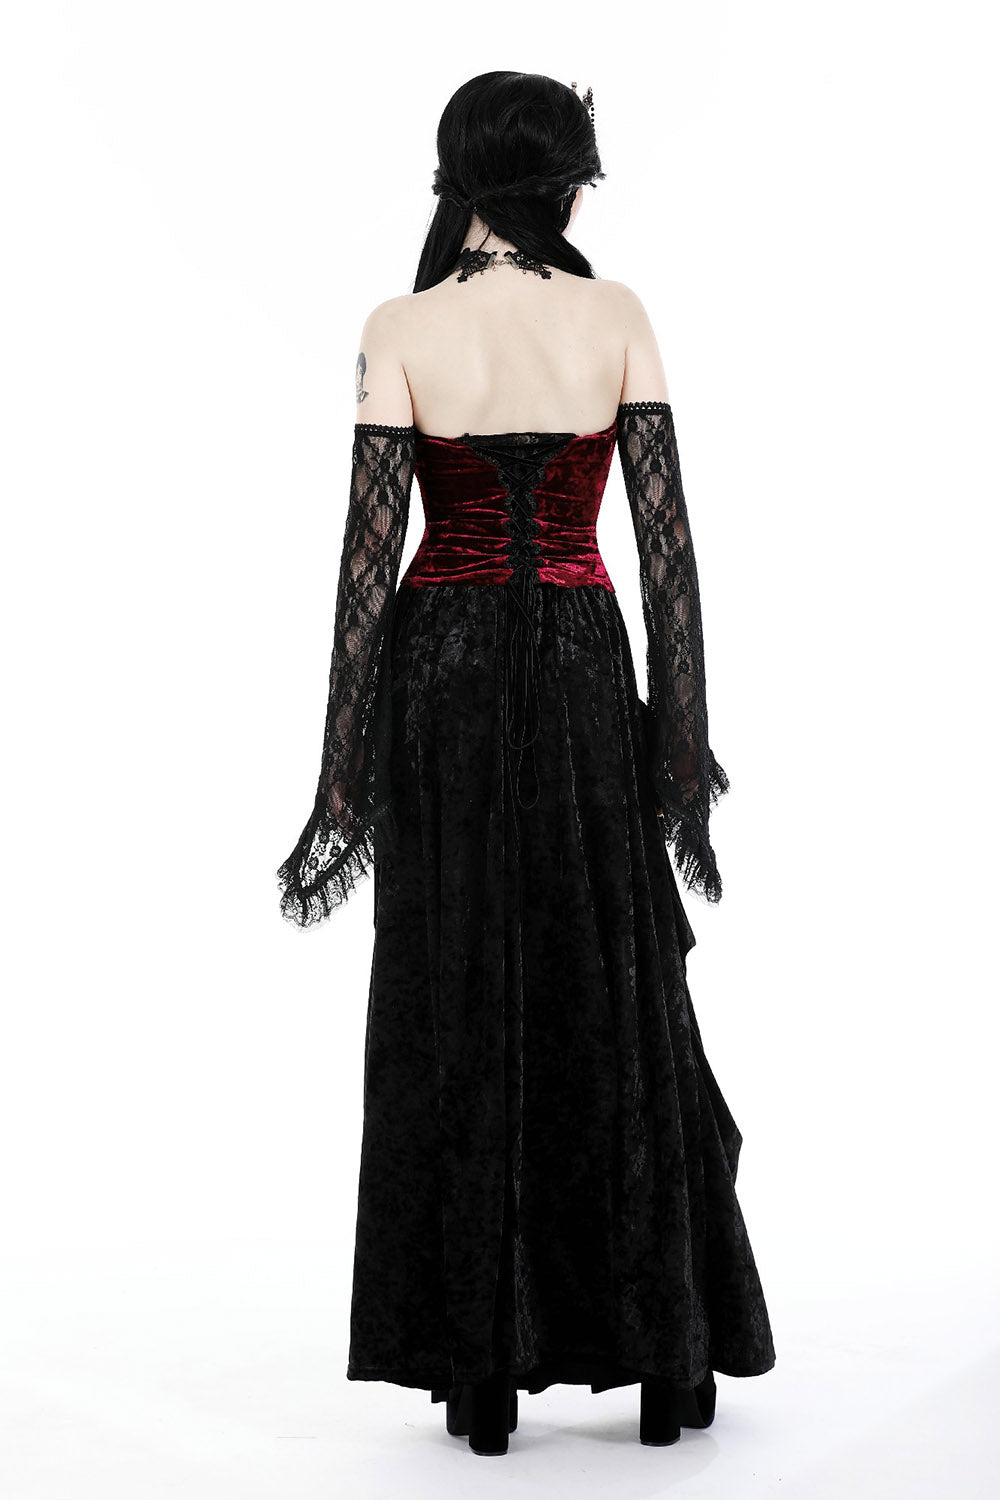 womens victorian goth lace corset